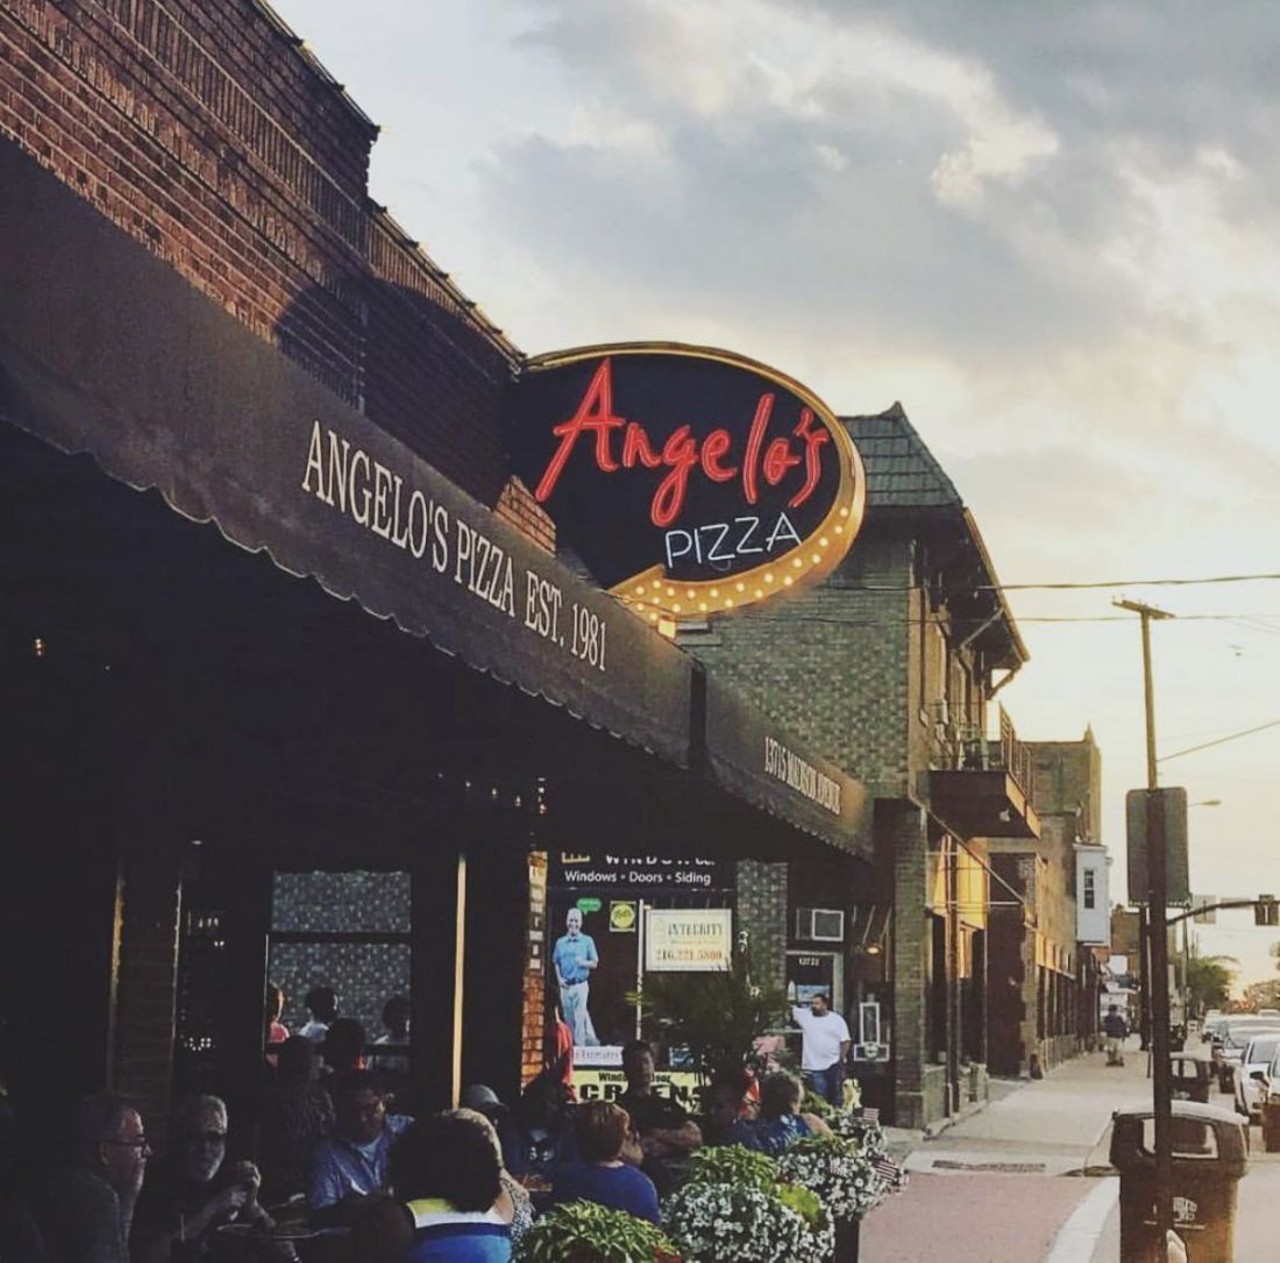  Angelo&#146;s
13715 Madison Ave., Lakewood
For the best pizza on the west side, and arguably all of Northeast Ohio, Angelo&#146;s on Madison is the spot. Whether you stay traditional, and stick to the normal pepperoni or cheese, or get crazy with a Philly cheese steak or baked potato pizza, you really can&#146;t go wrong.
Photo via @E.ScruggsJR/Instagram